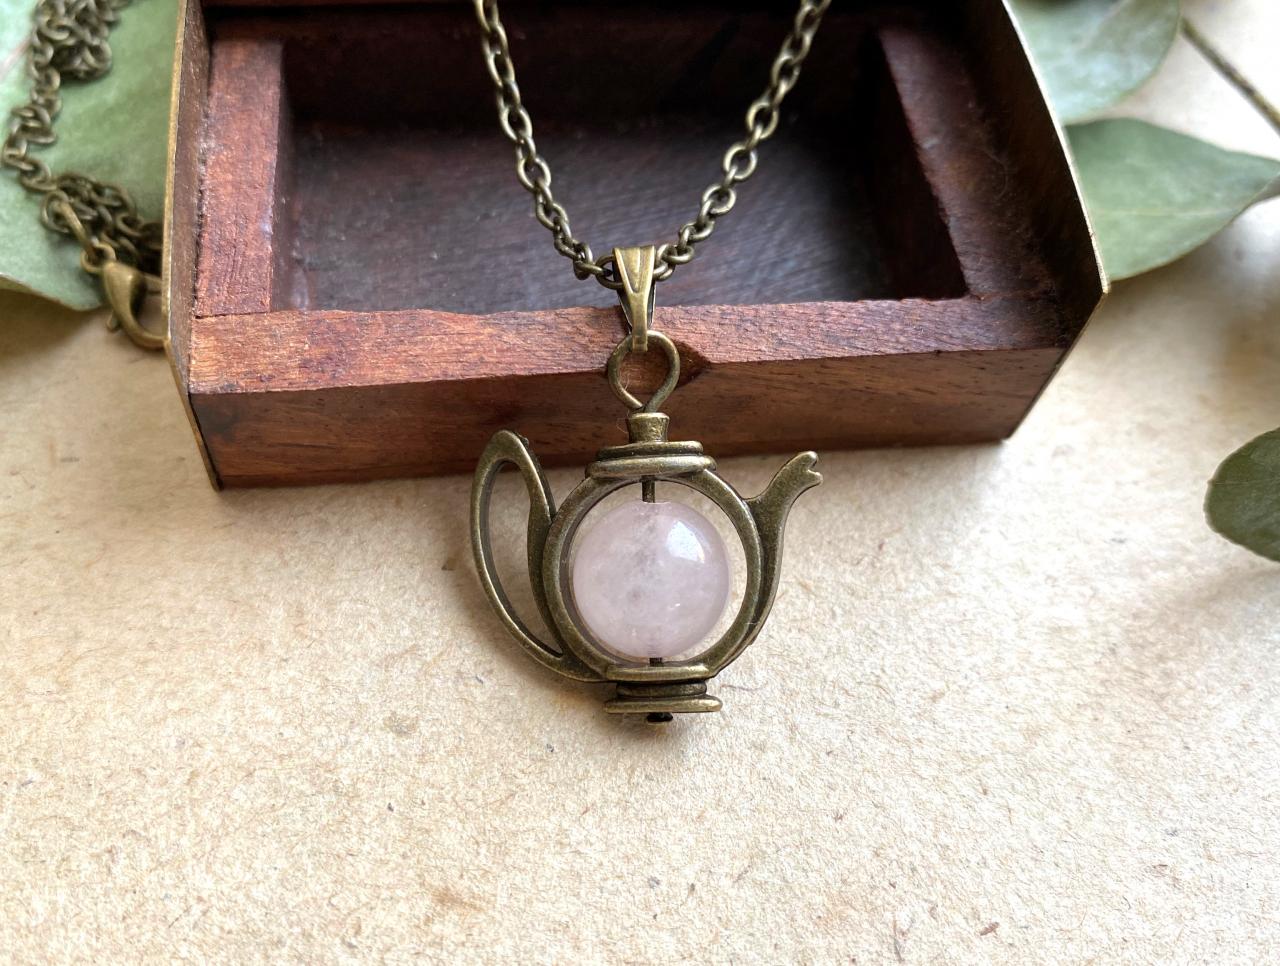 Teapot Necklace With A Rose Quartz Crystal Pearl, Alice In Wonderland Inspired, Rose Quartz Necklace, Fun Necklace, Whimsical Fun, Gemstone